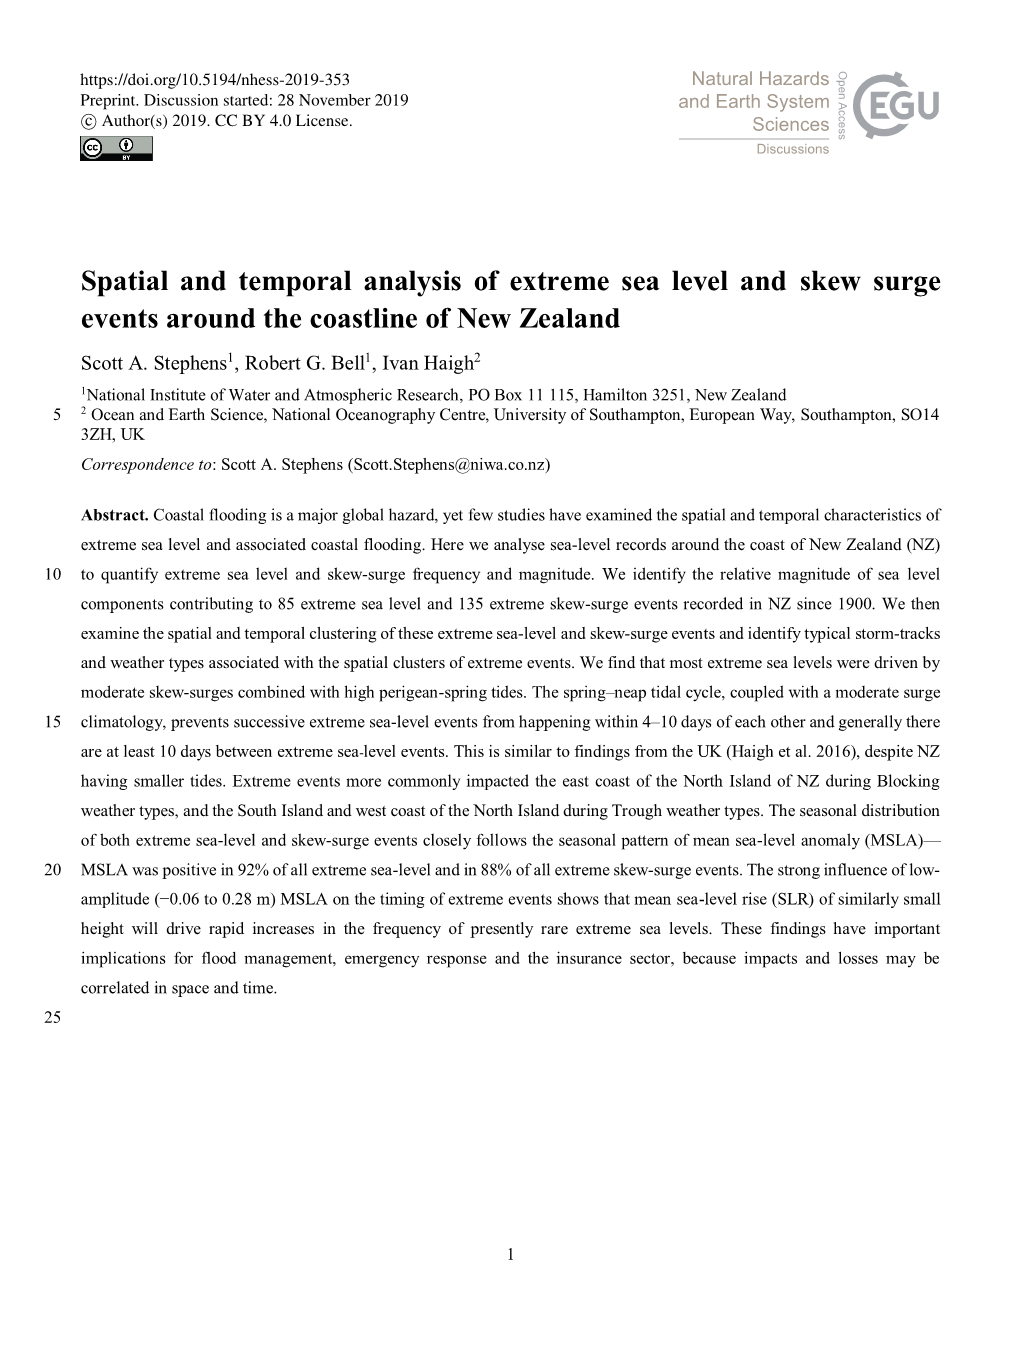 Spatial and Temporal Analysis of Extreme Sea Level and Skew Surge Events Around the Coastline of New Zealand Scott A